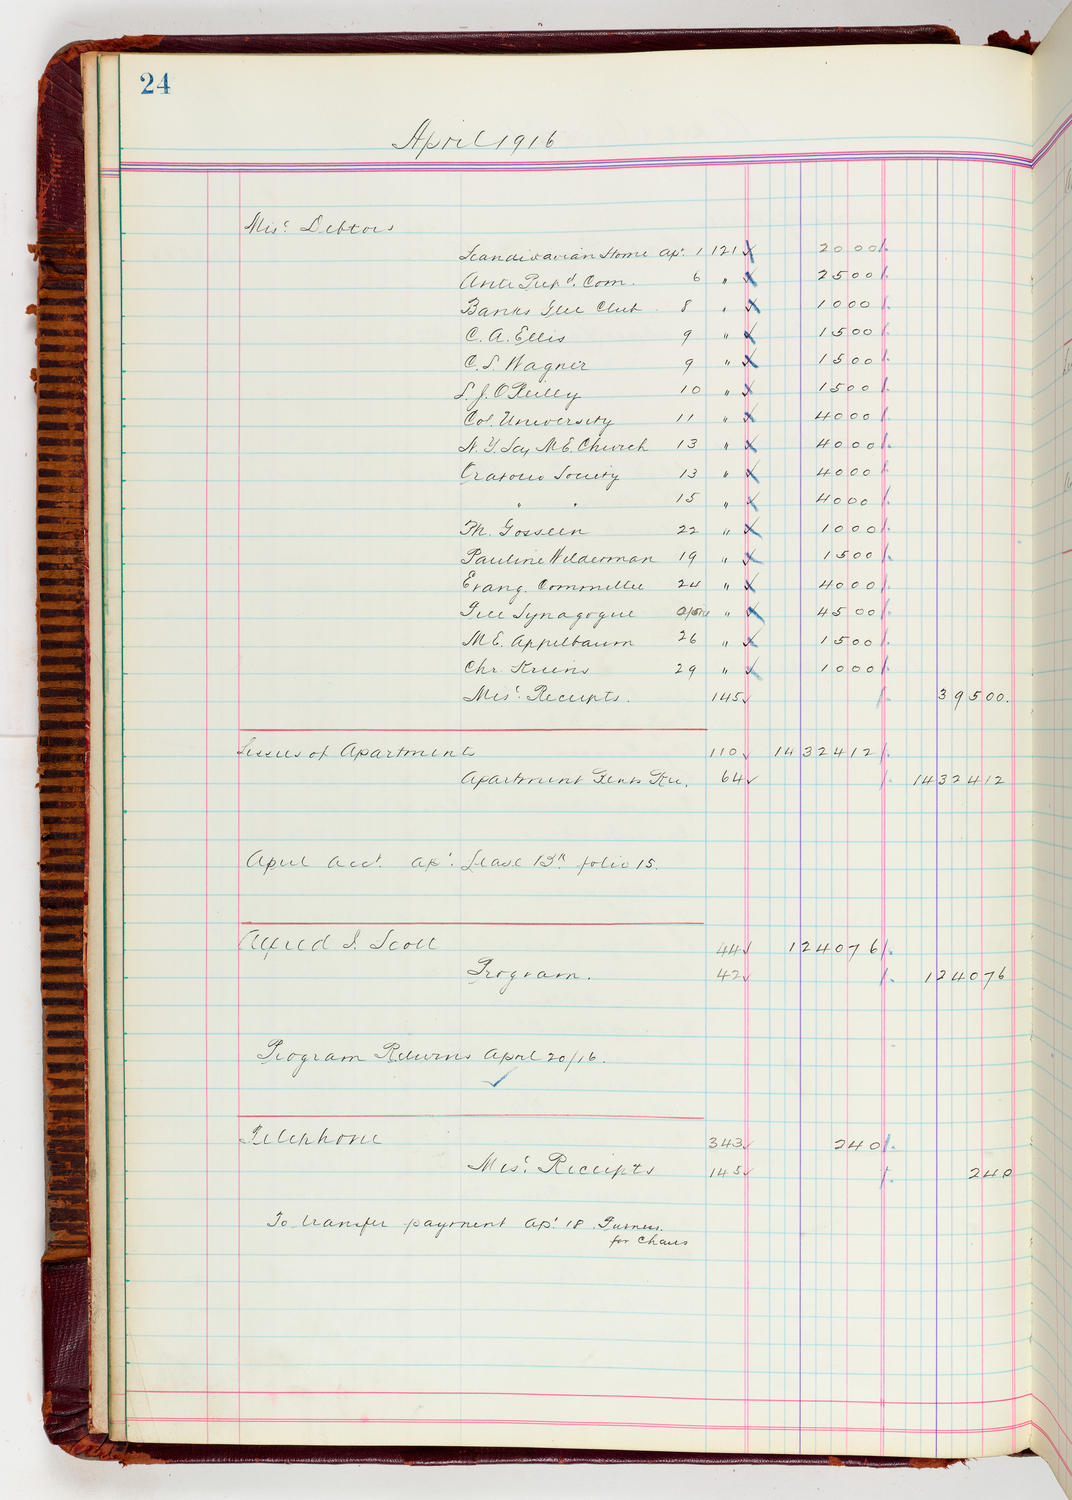 Music Hall Accounting Ledger, volume 5, page 24